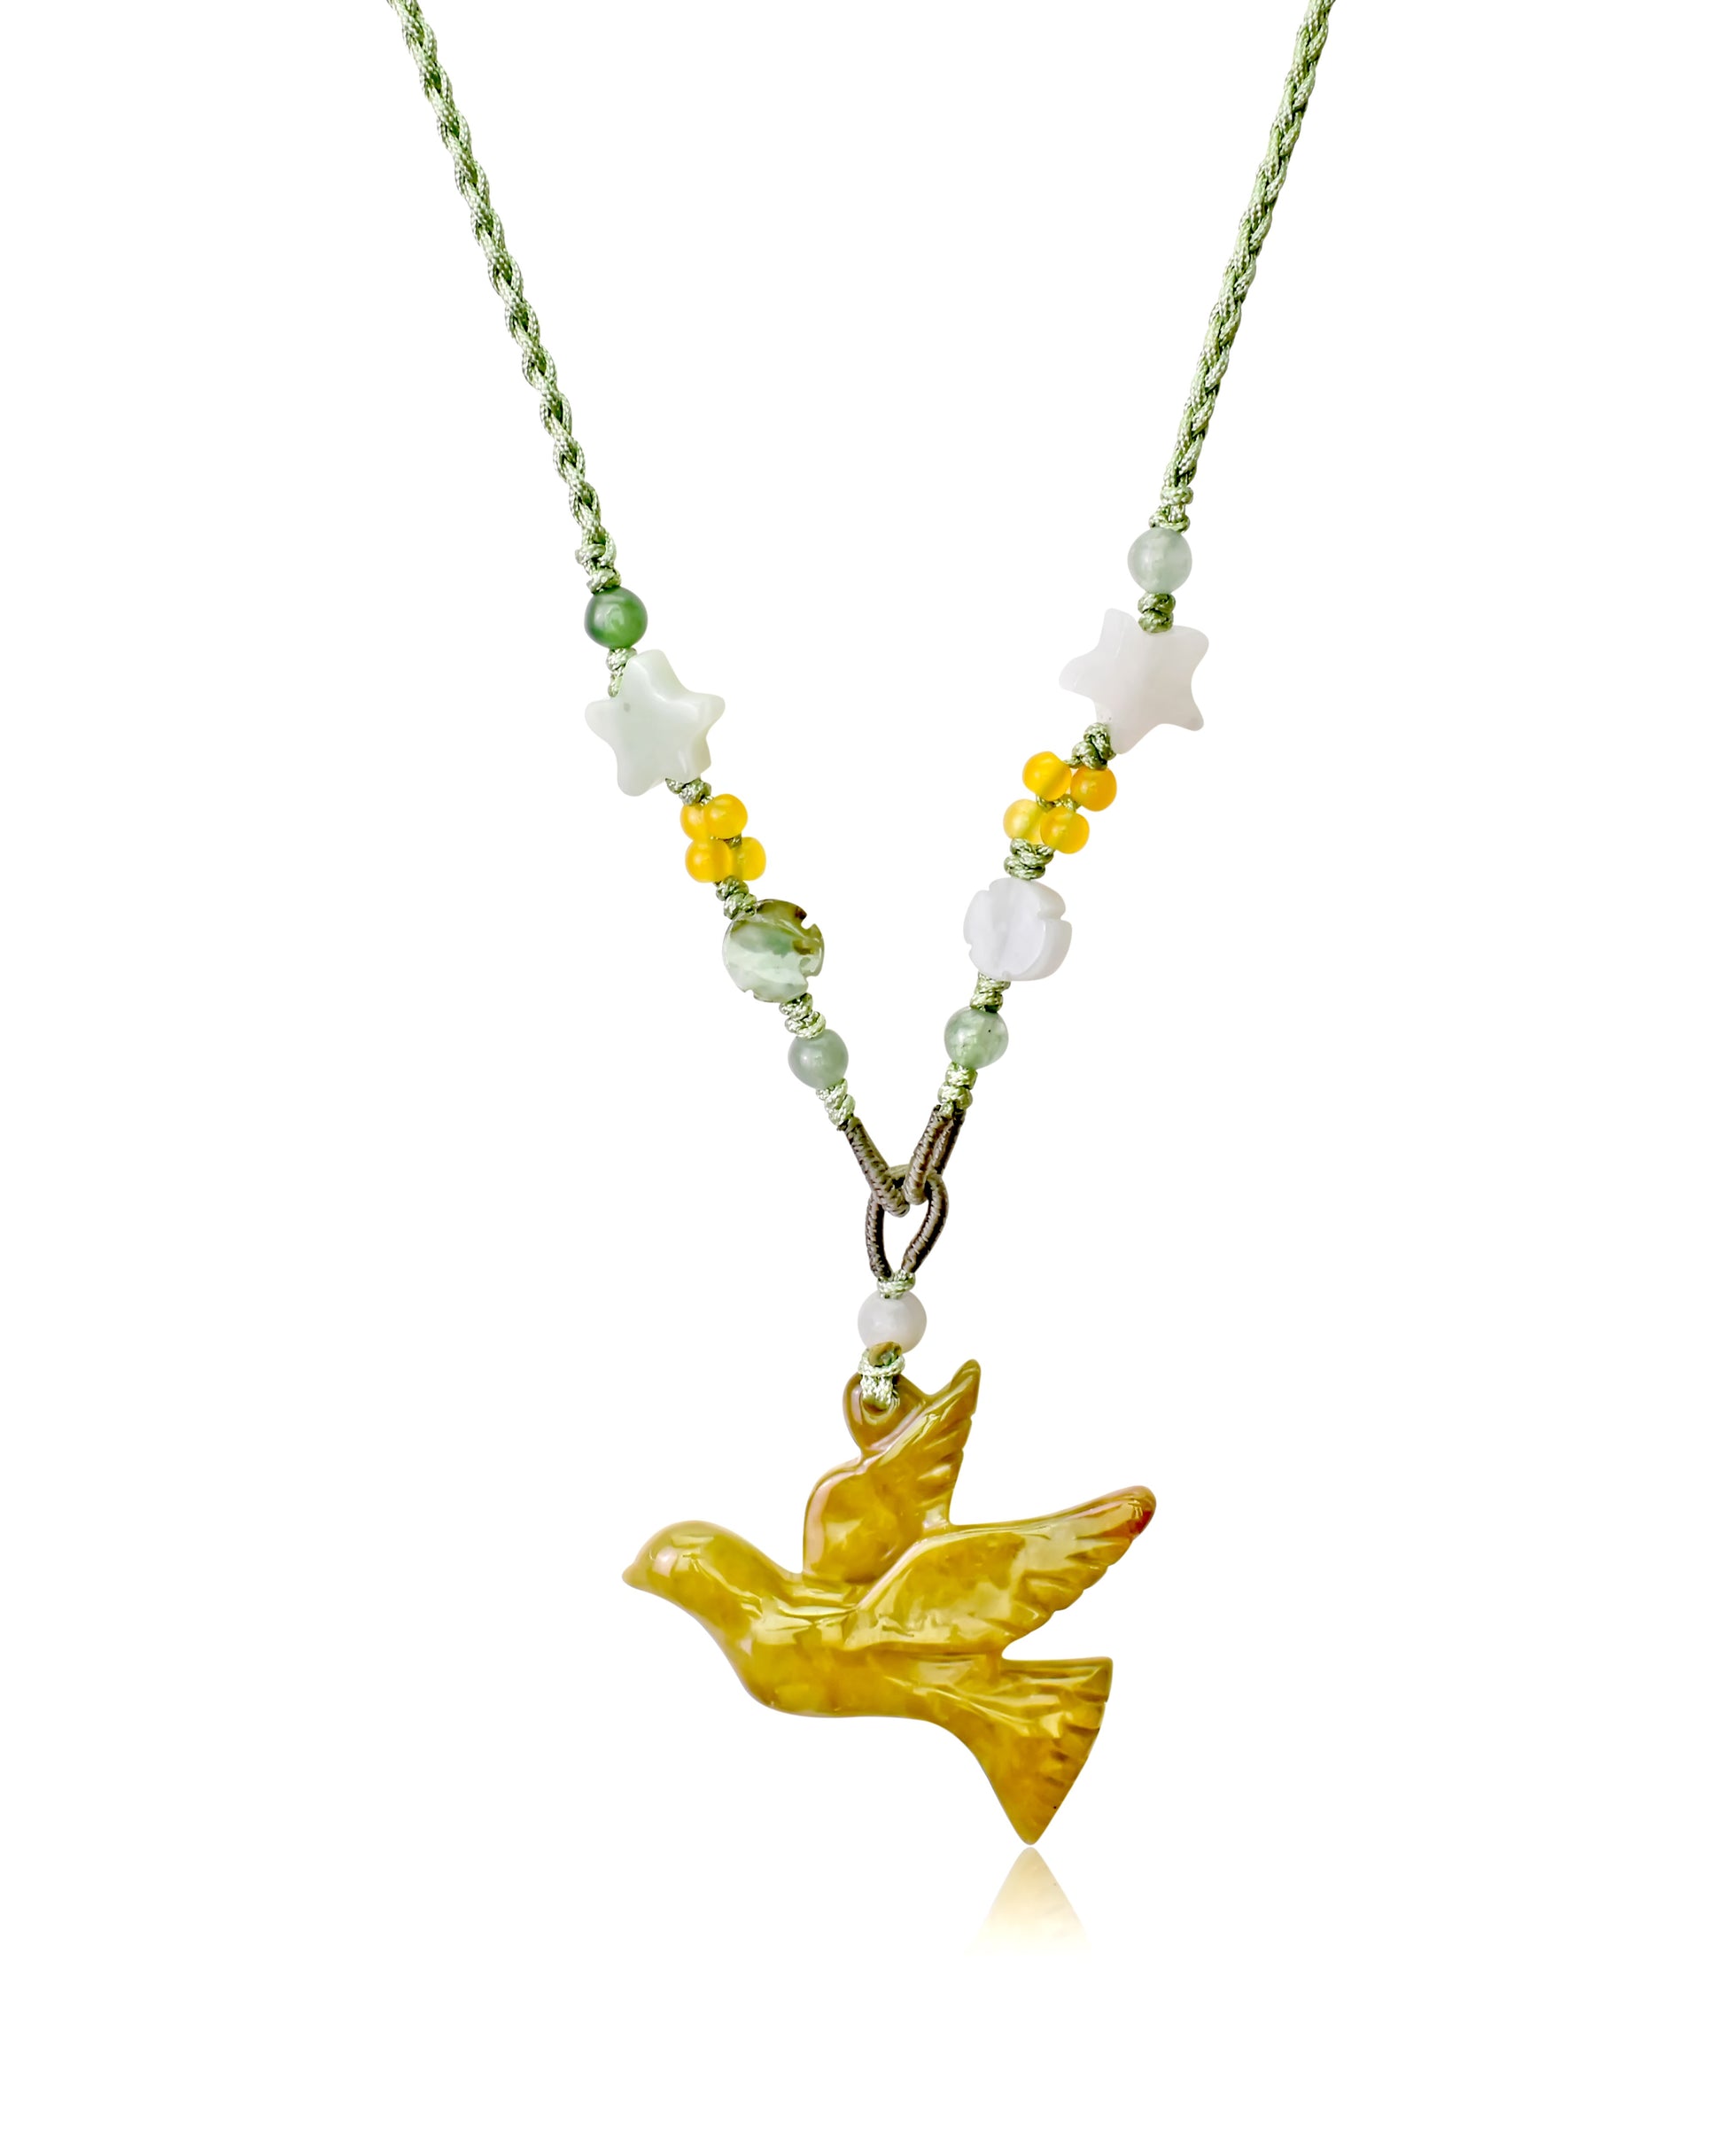 Feel the Power of a New Beginning with Elegant Bird Jade Necklace